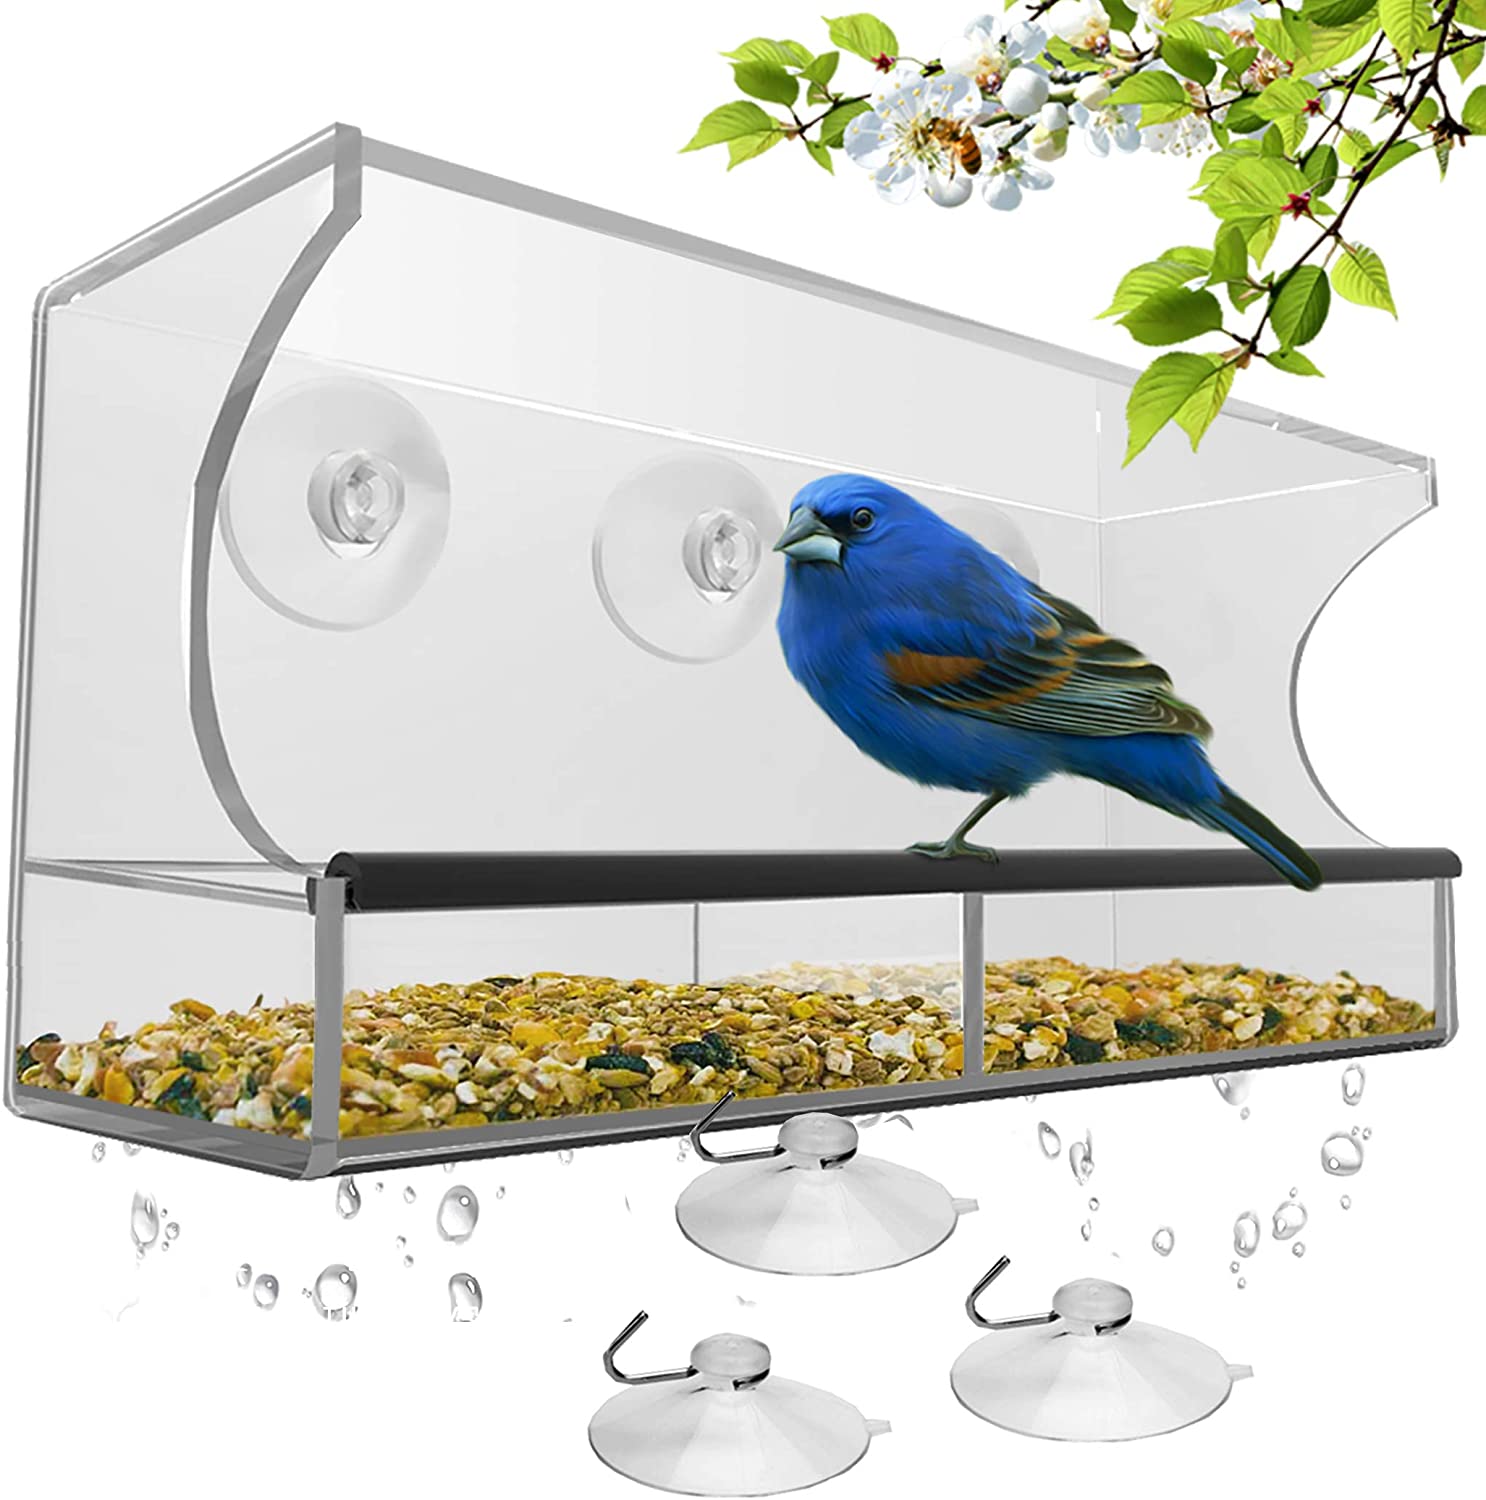 Pet Dog Bowl Factory –  Large Clear Window Bird Feeder Enjoy Birds Close From Inside House Best For Kids And Pets Mounts With 3 All-Weather Suction Cups – Sky Creation